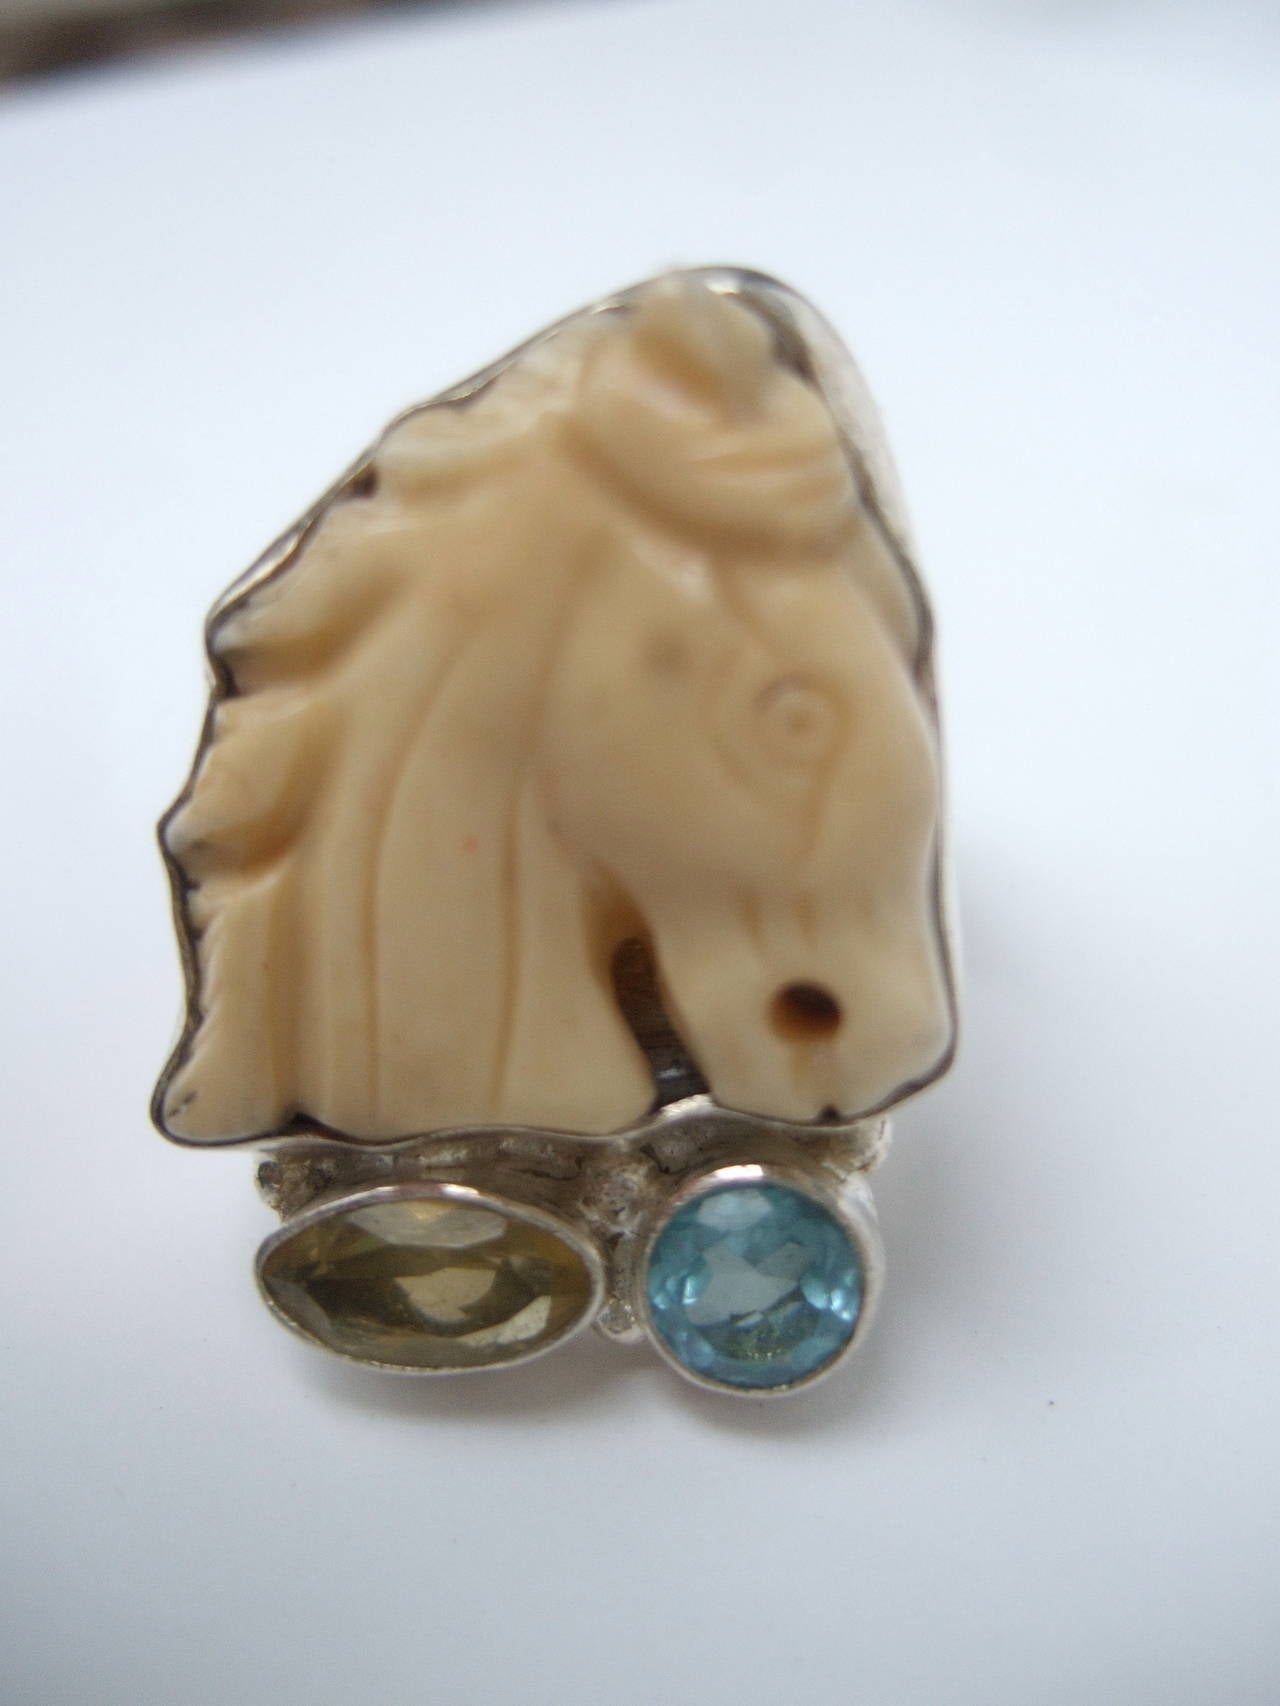 Artisan carved bone horse head sterling ring Size 9 1/2
The handmade sterling ring is adorned with a carved
bone horse head embellished with an aquamarine &
golden citrine faceted semi precious stones

The intricately carved horse head is set